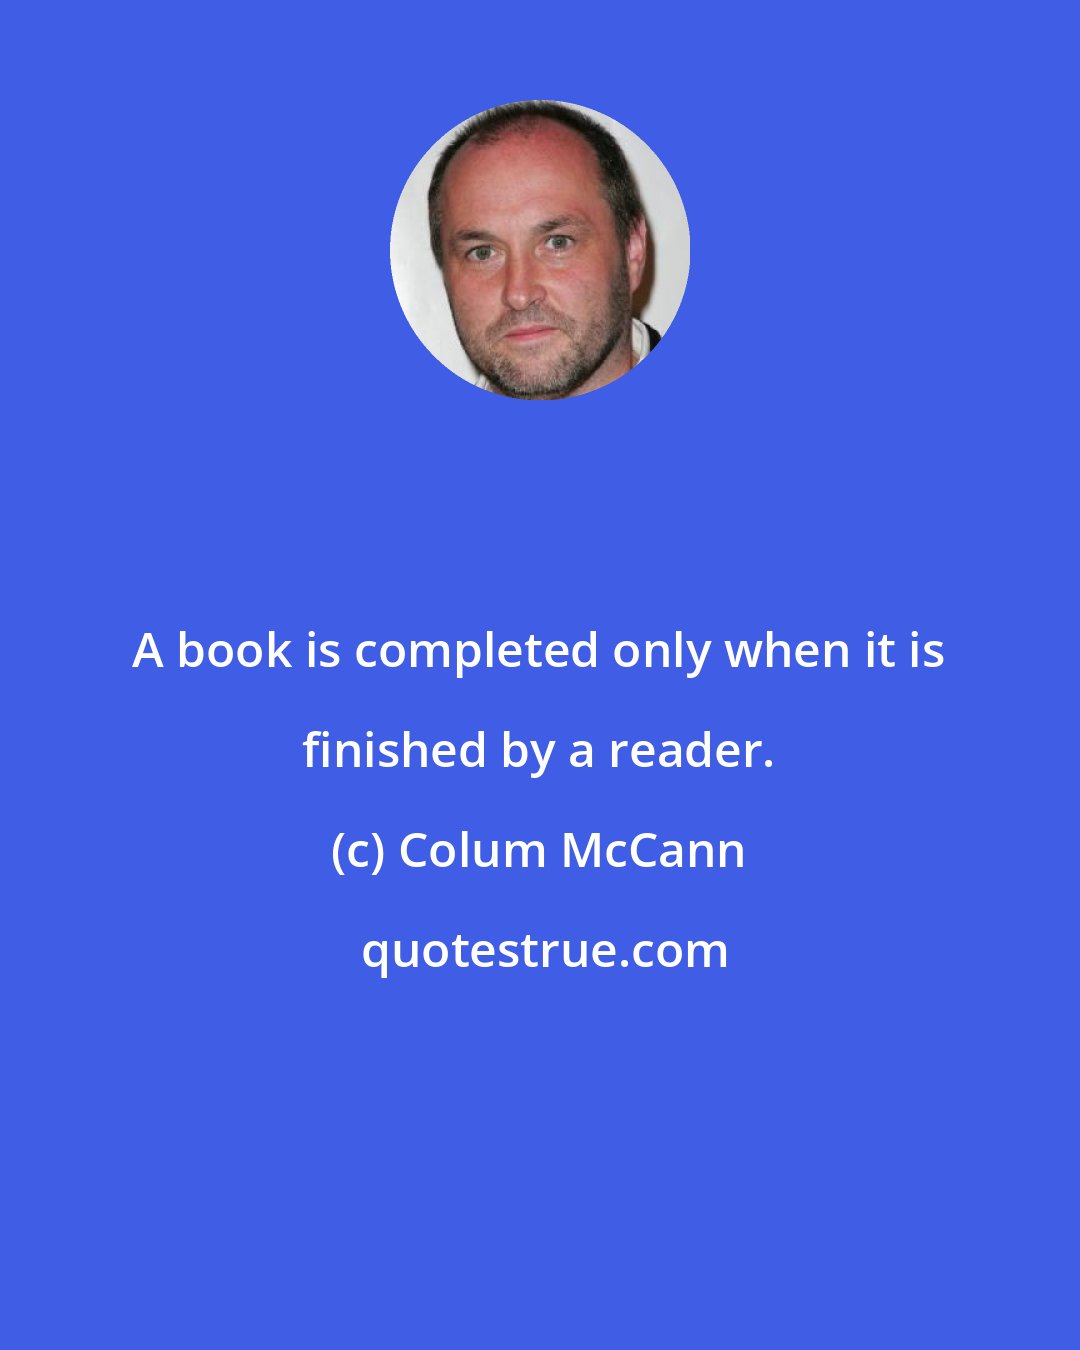 Colum McCann: A book is completed only when it is finished by a reader.